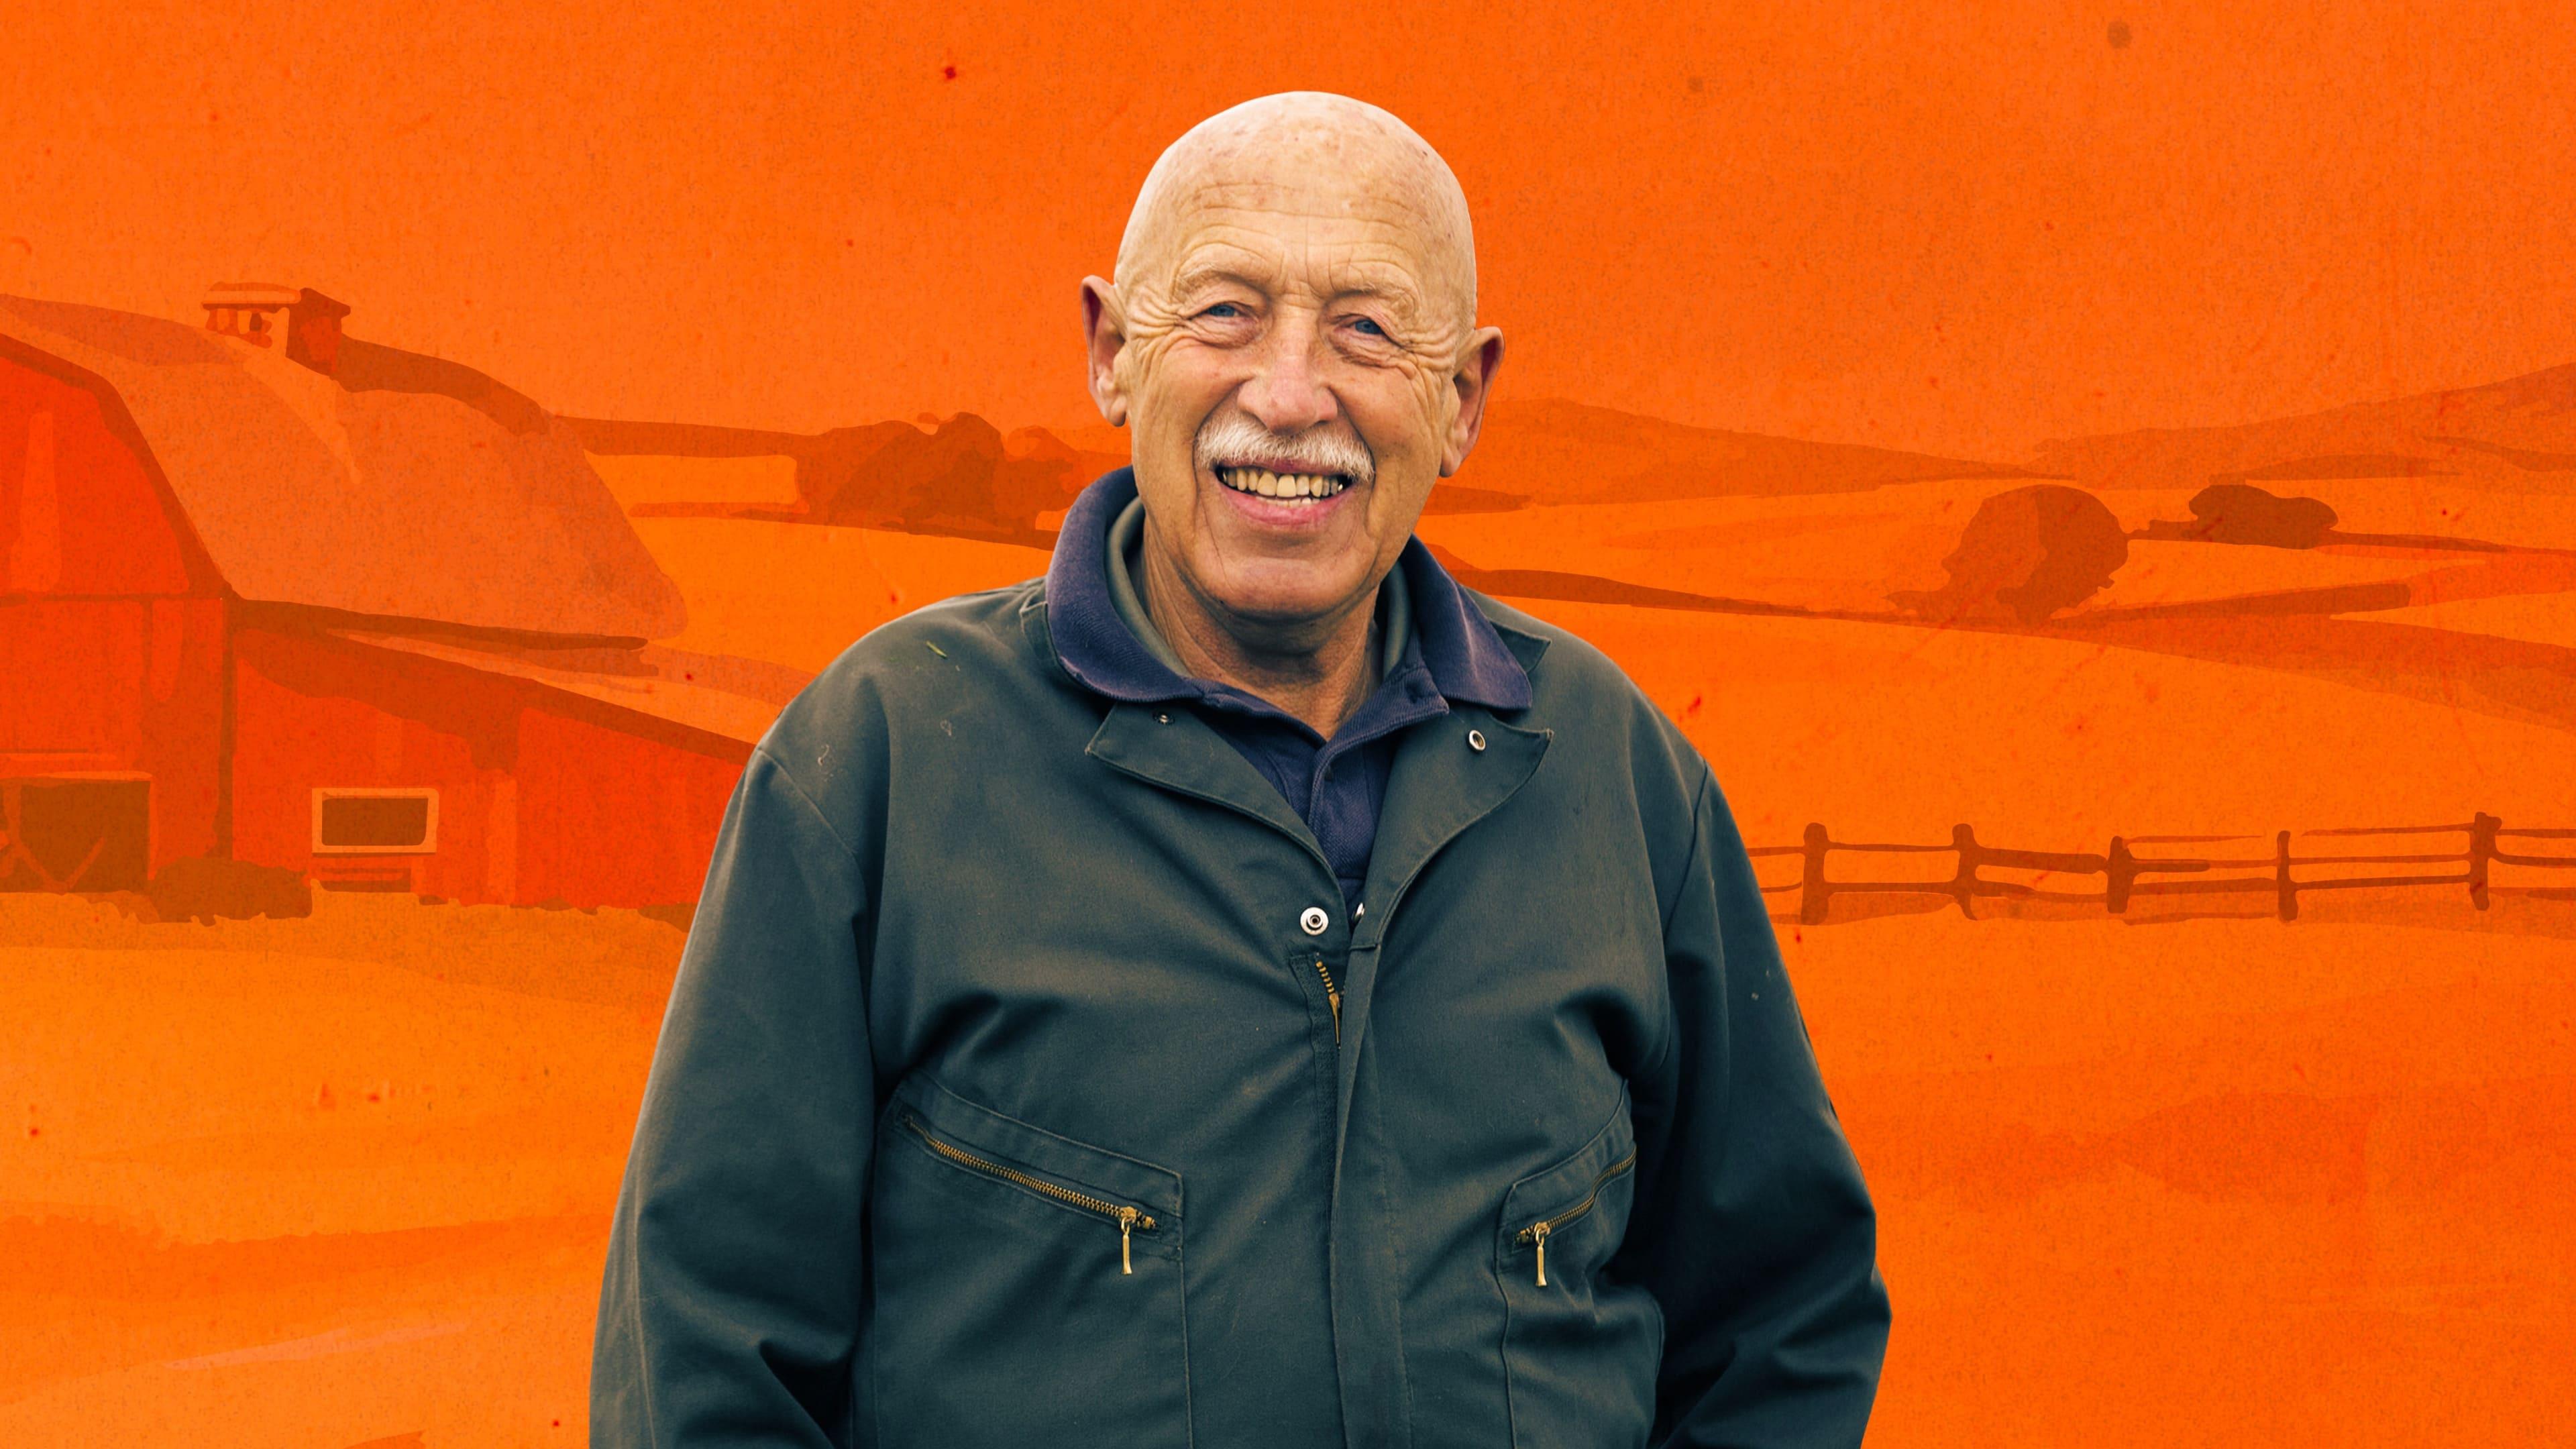 The Incredible Dr. Pol backdrop